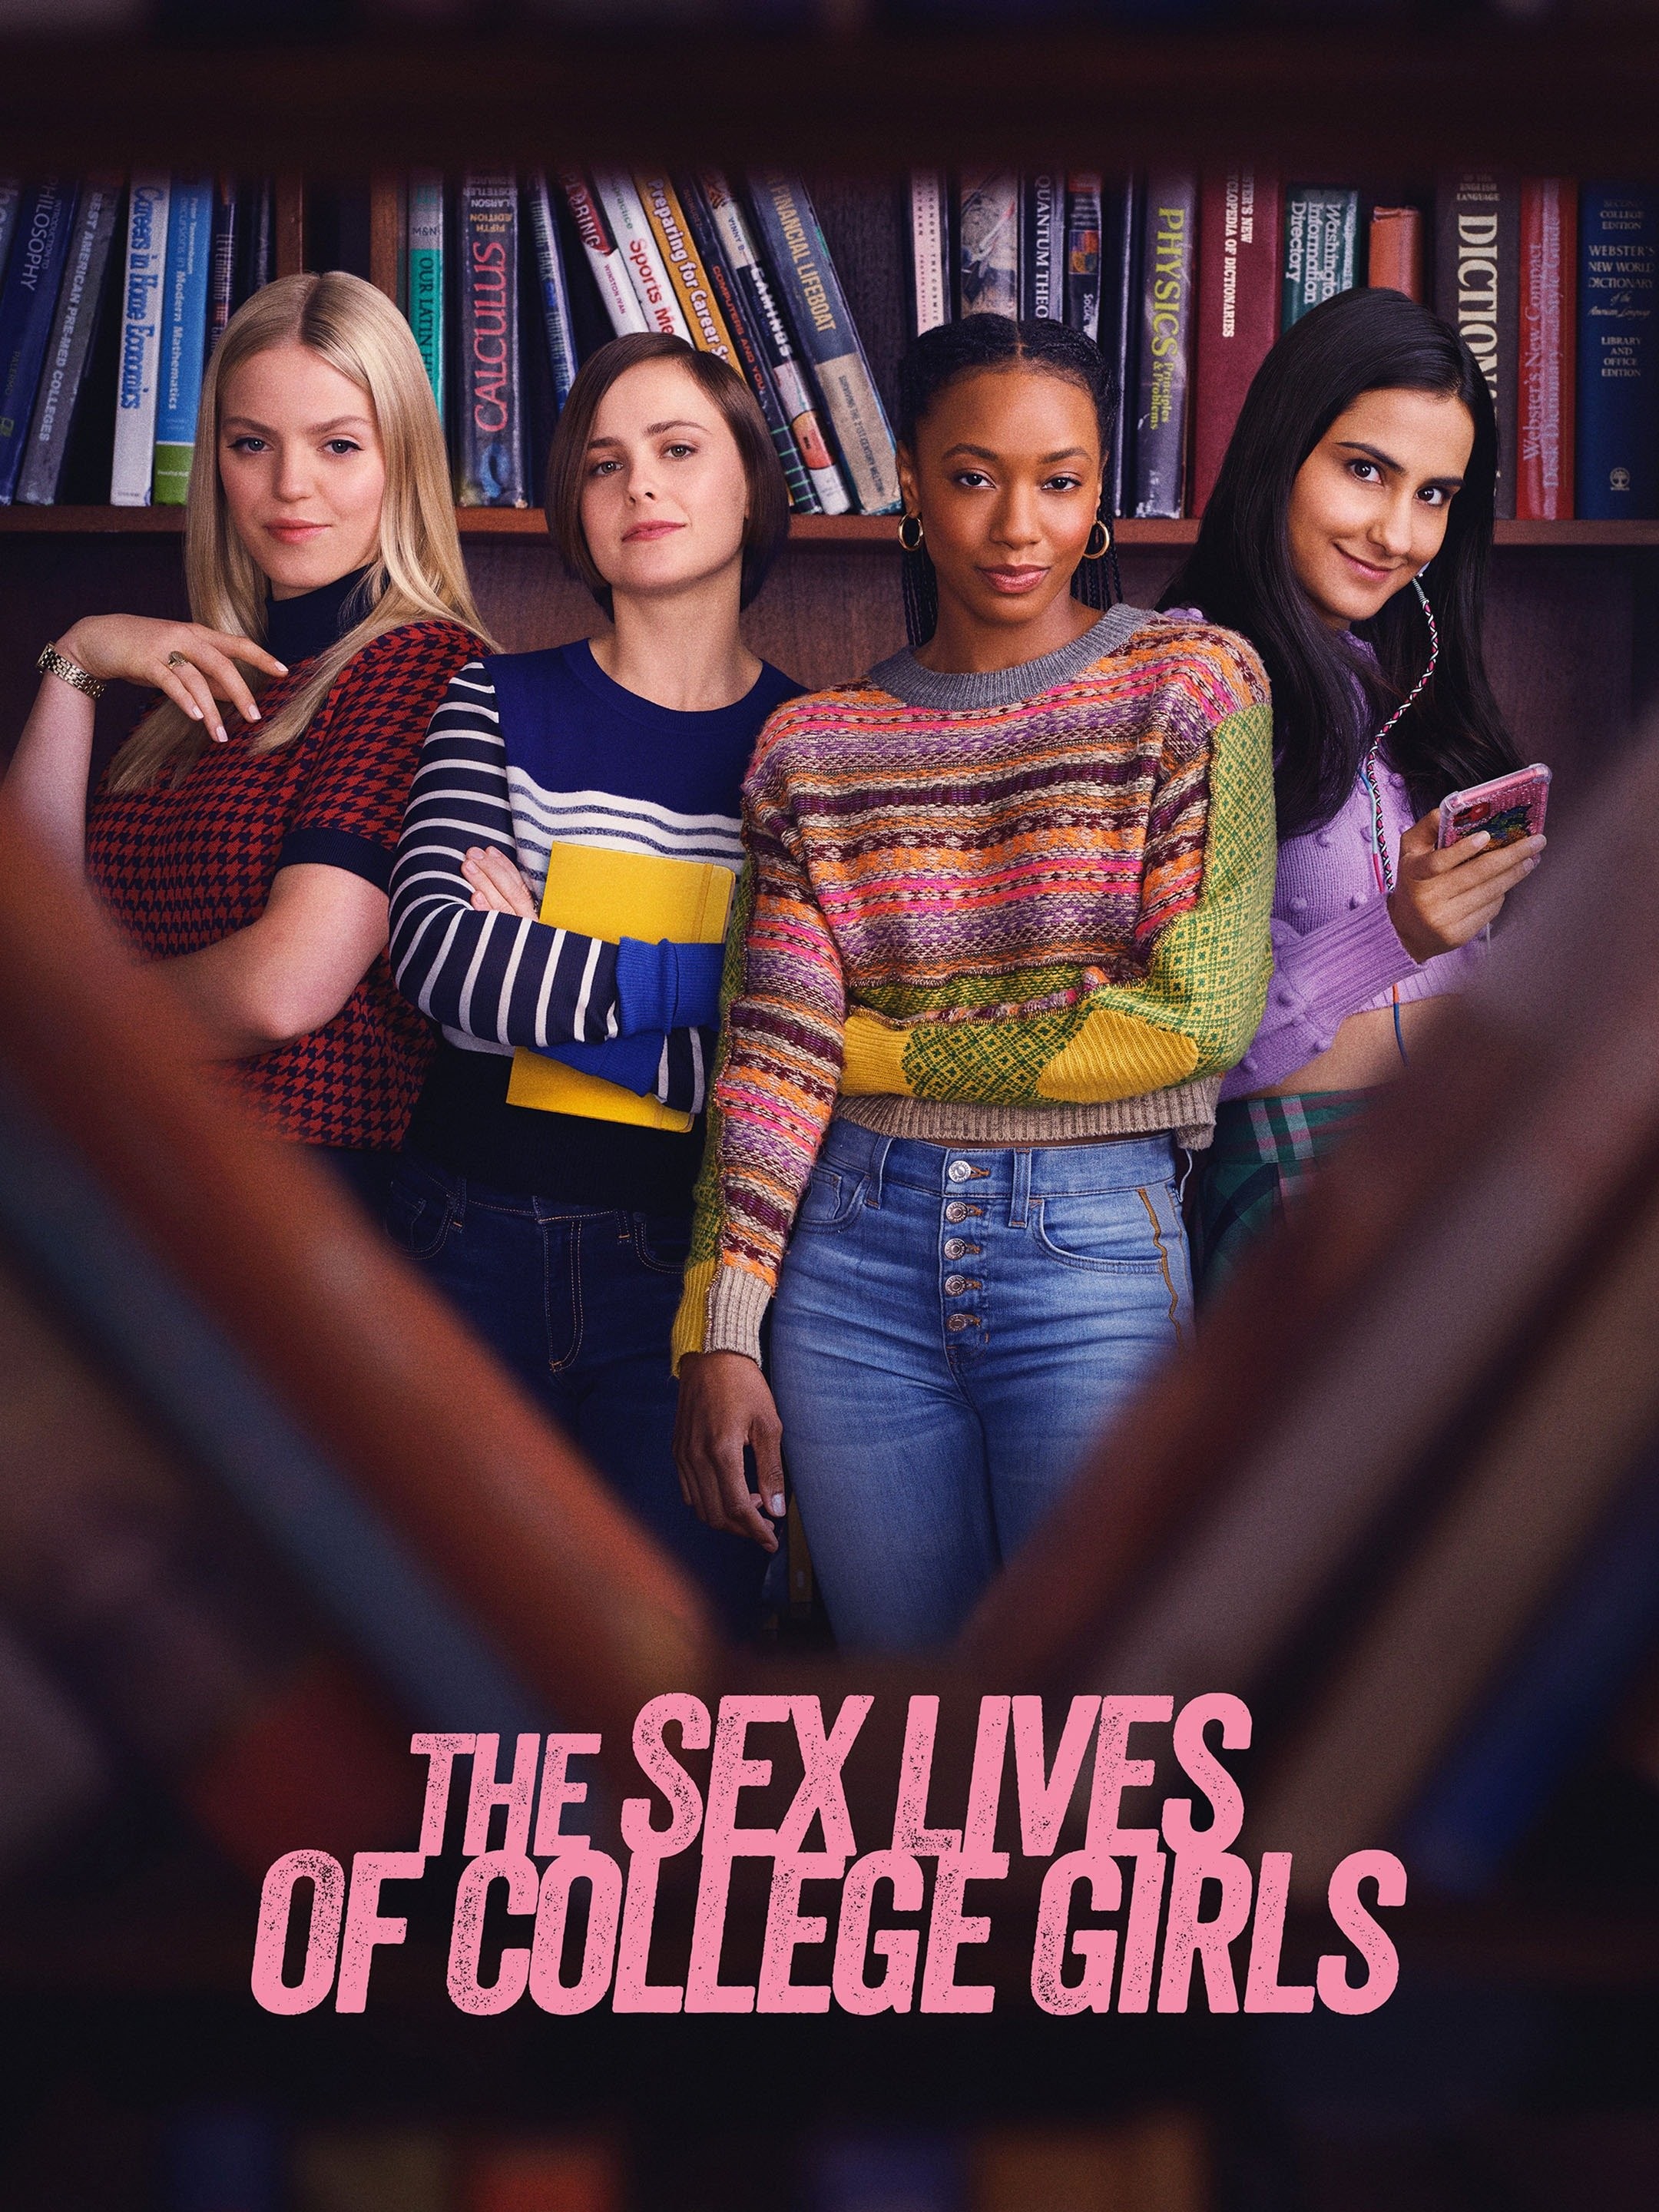 10age Girl Sex - The Sex Lives of College Girls - Rotten Tomatoes